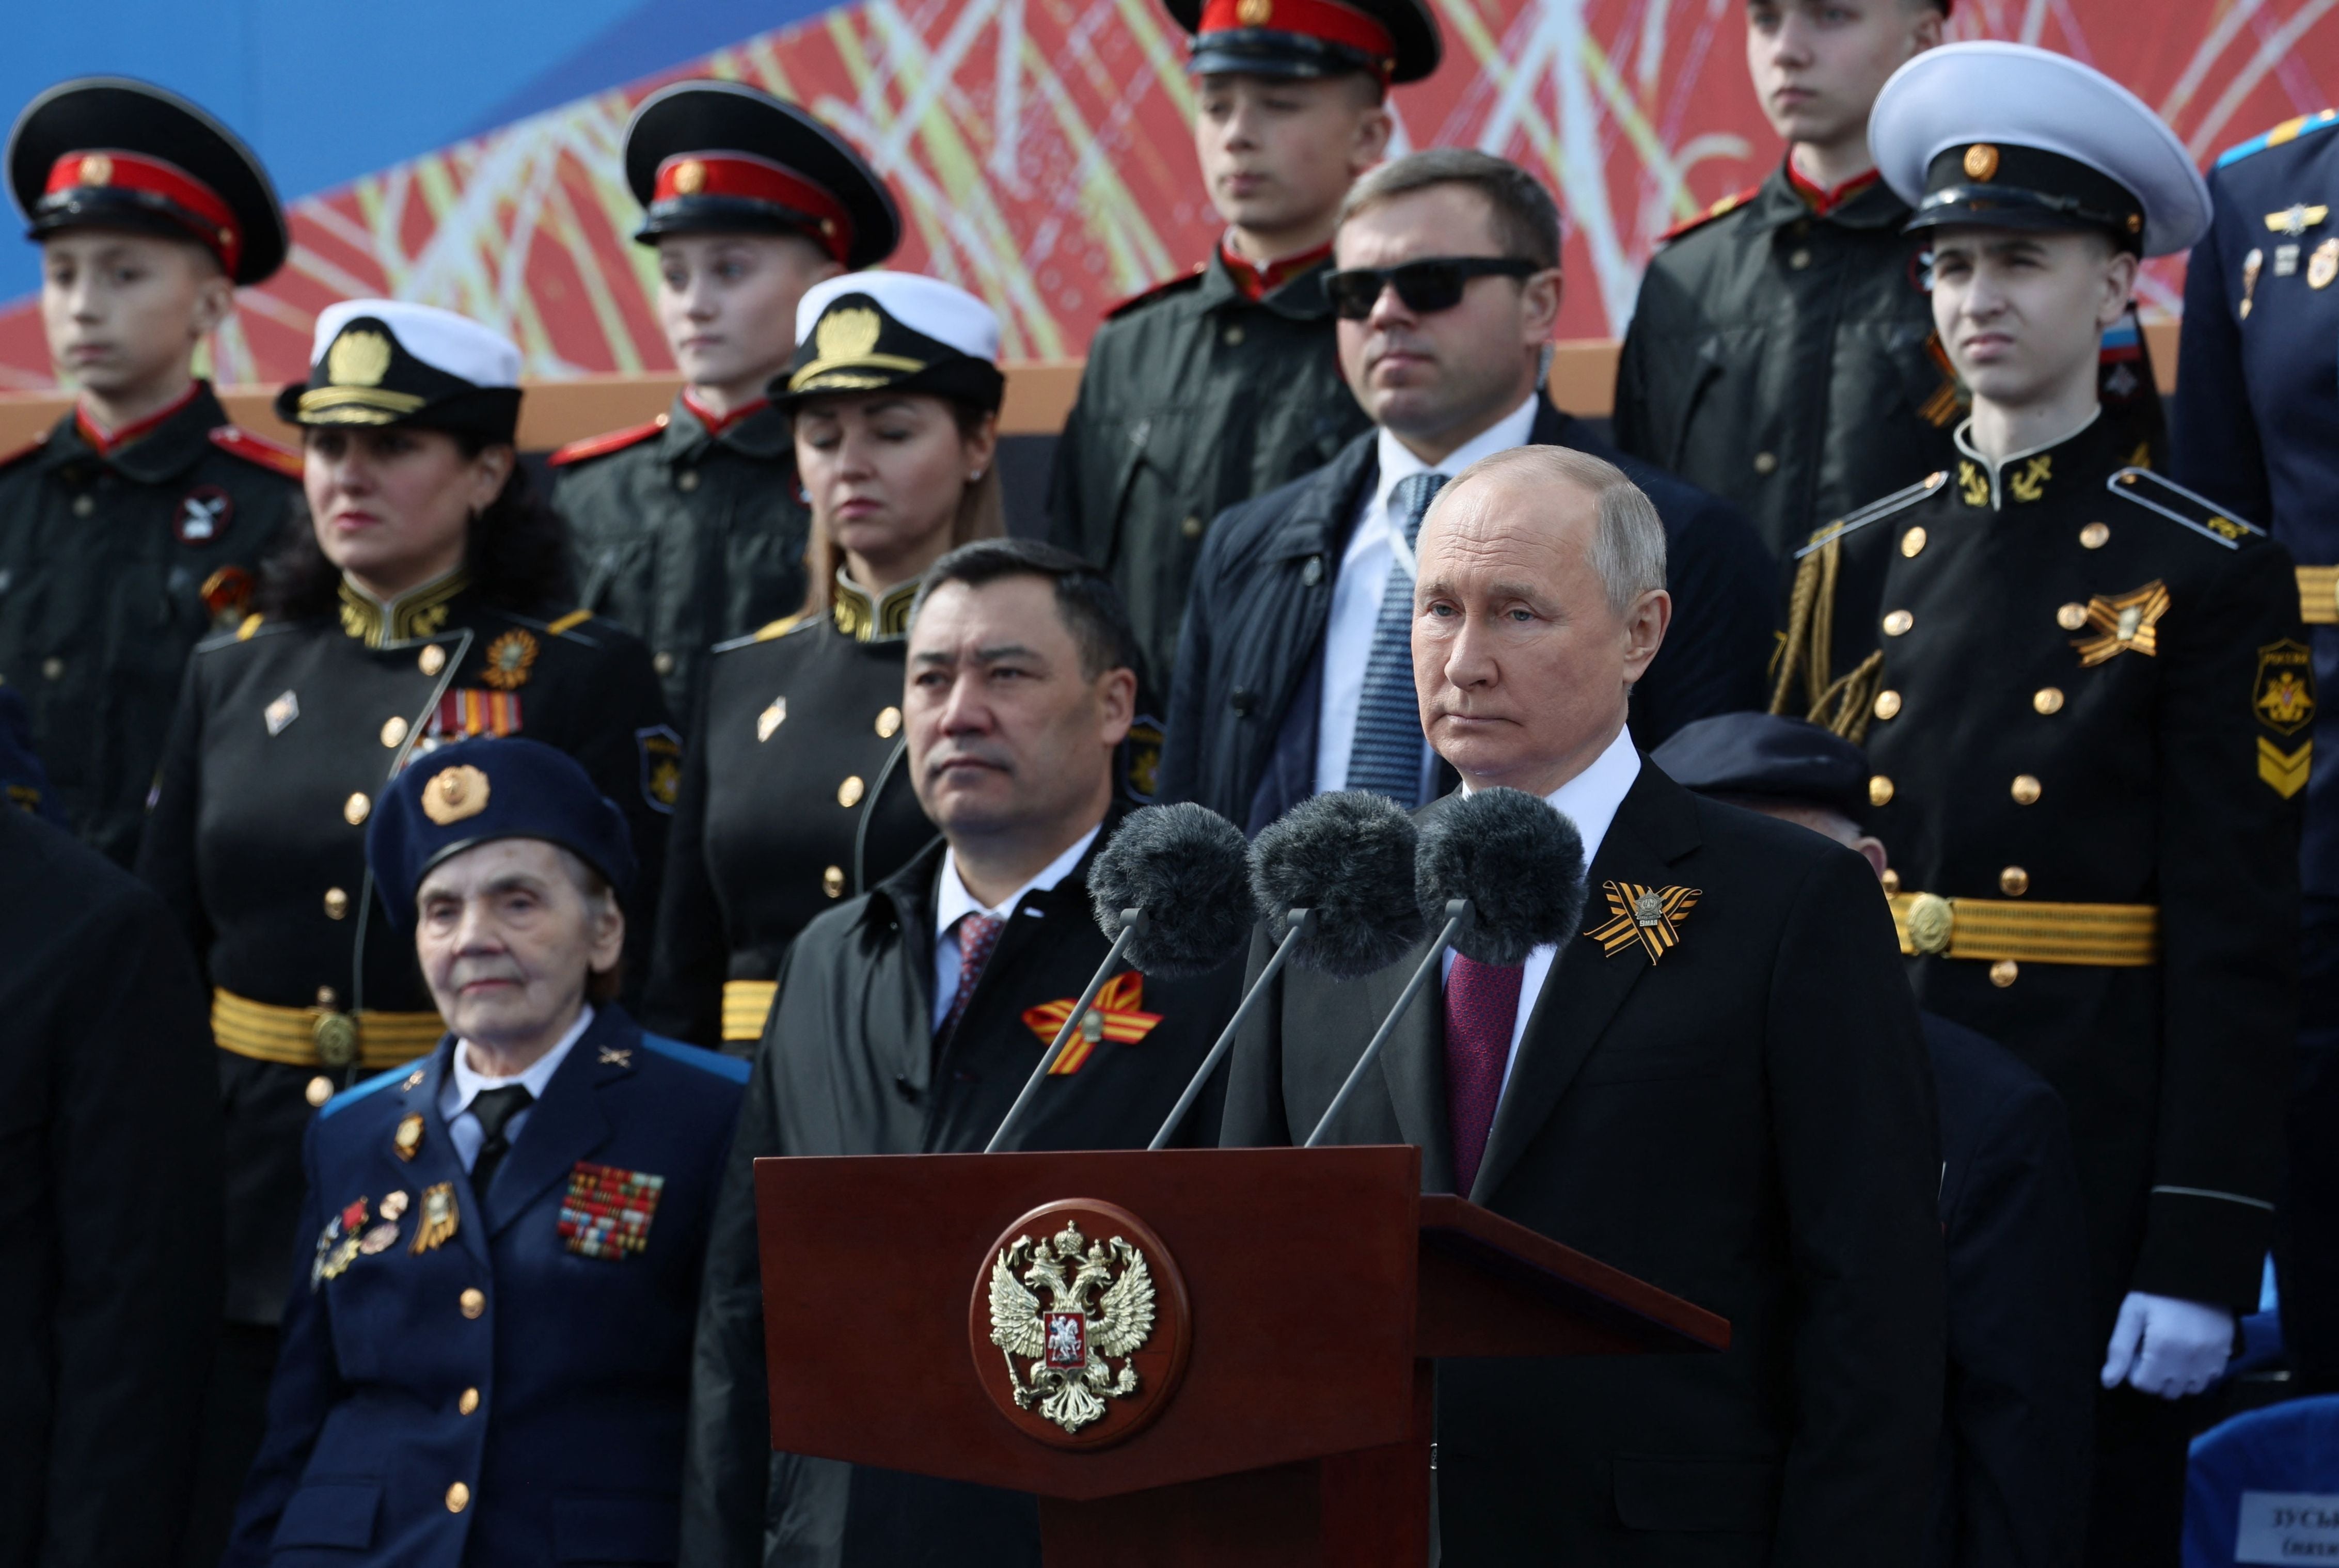 Russian president Vladimir Putin gives a speech during the Victory Day military parade on Red Square